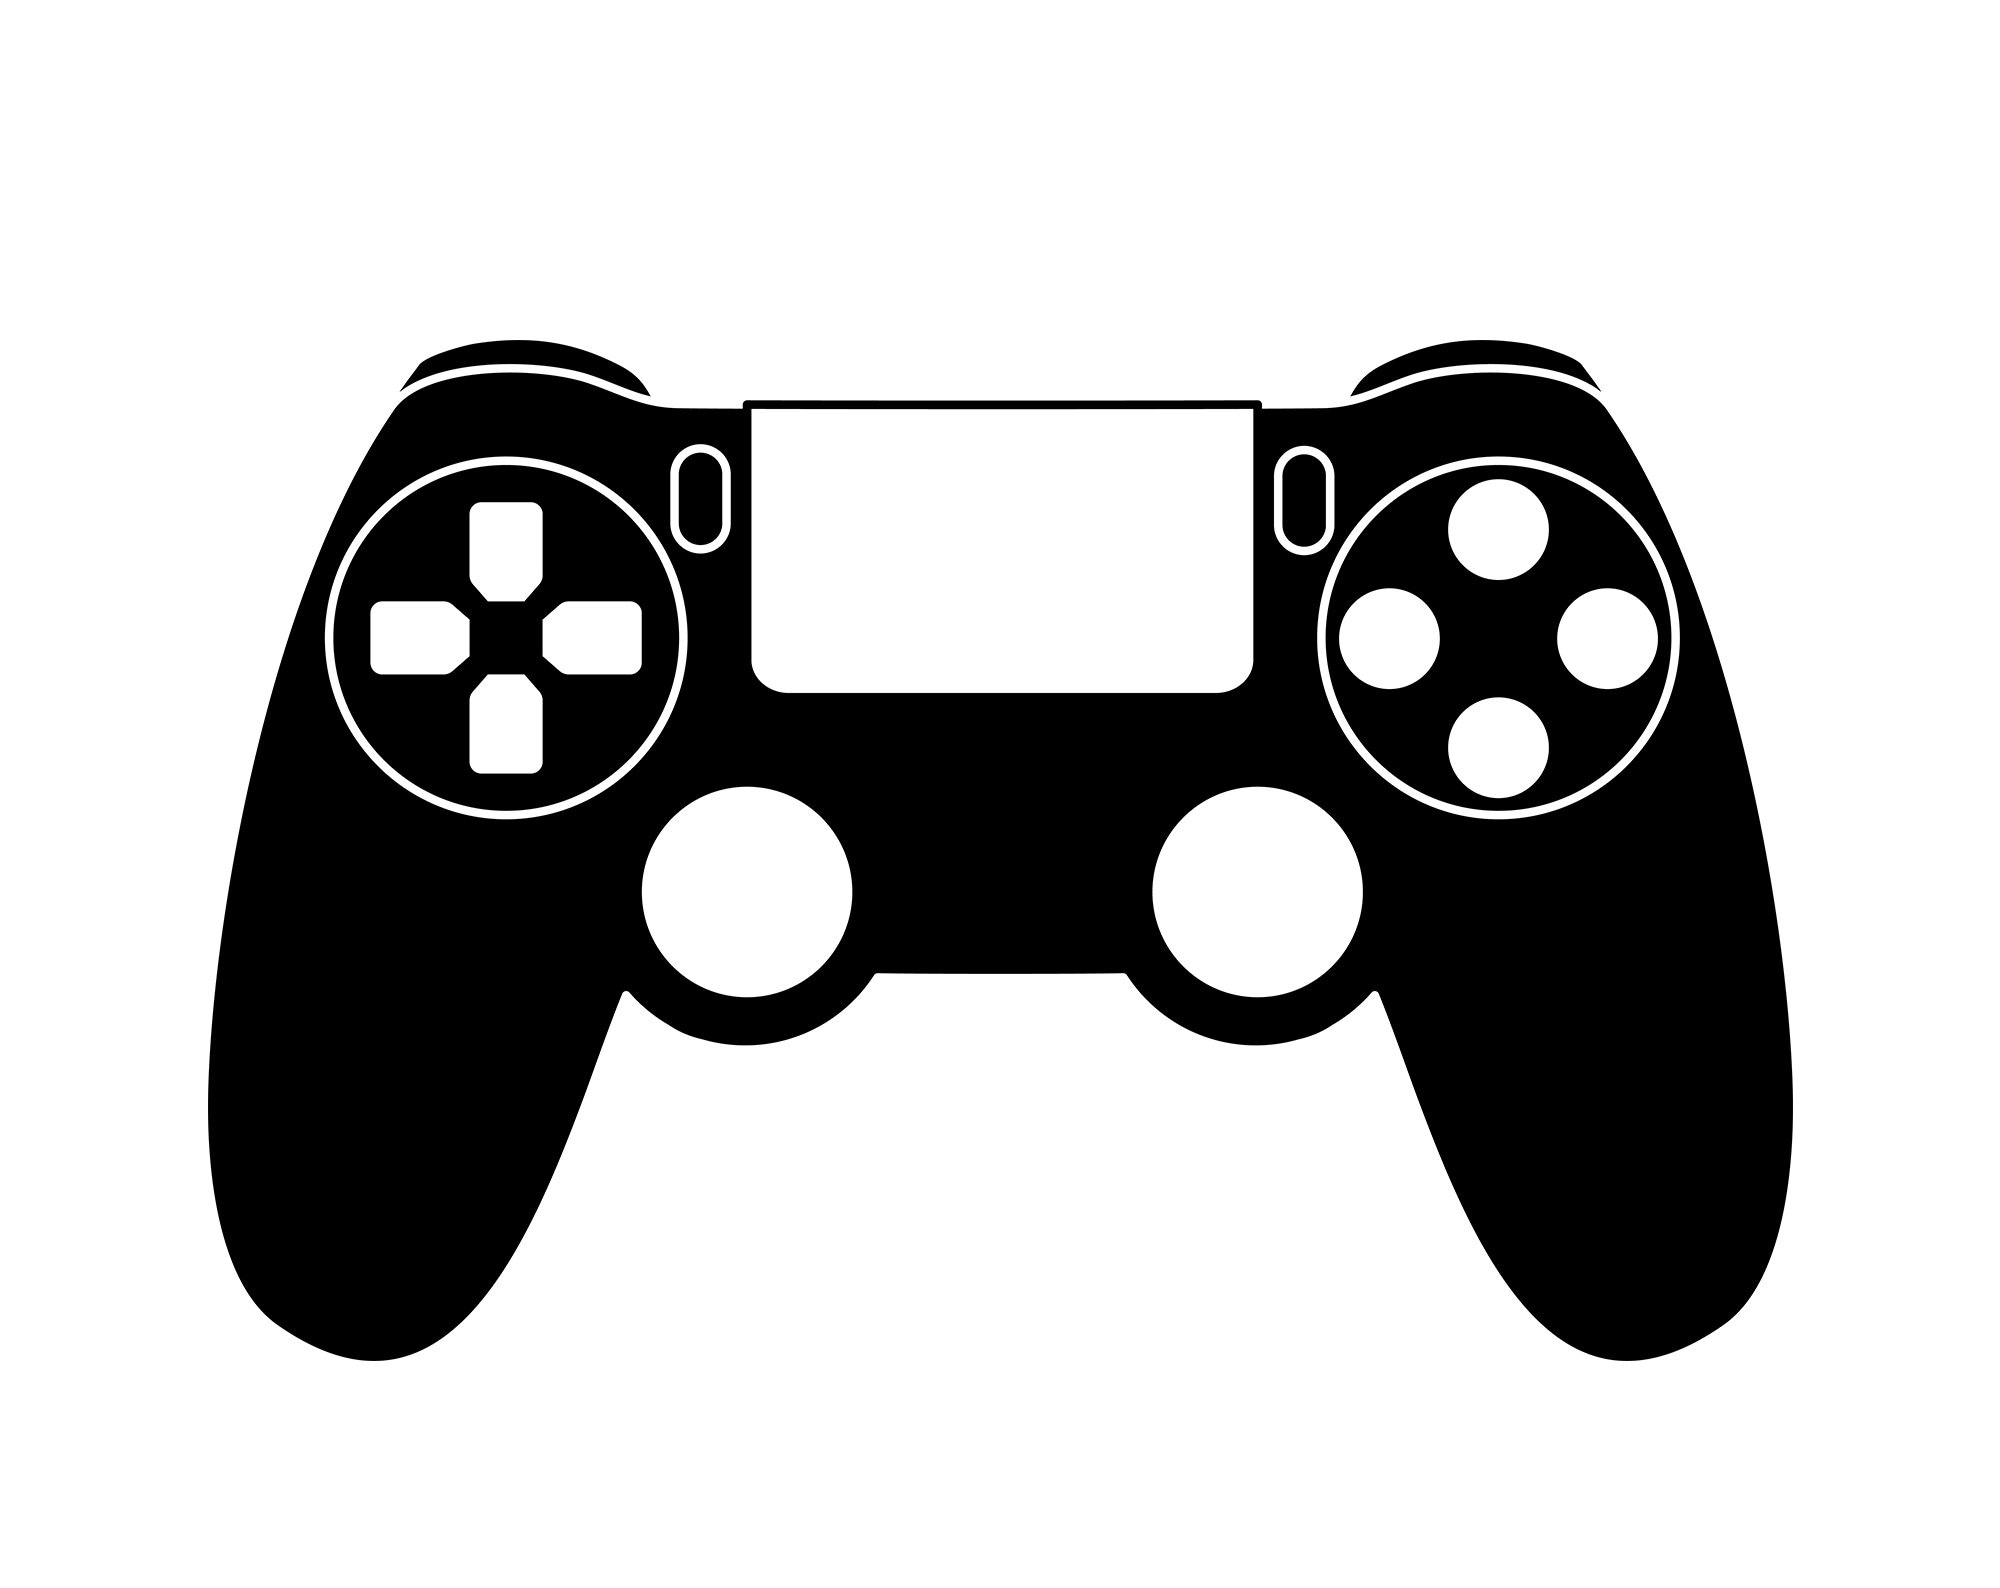 Multiplayer Online Games Joystick Vector SVG Icon - SVG Repo